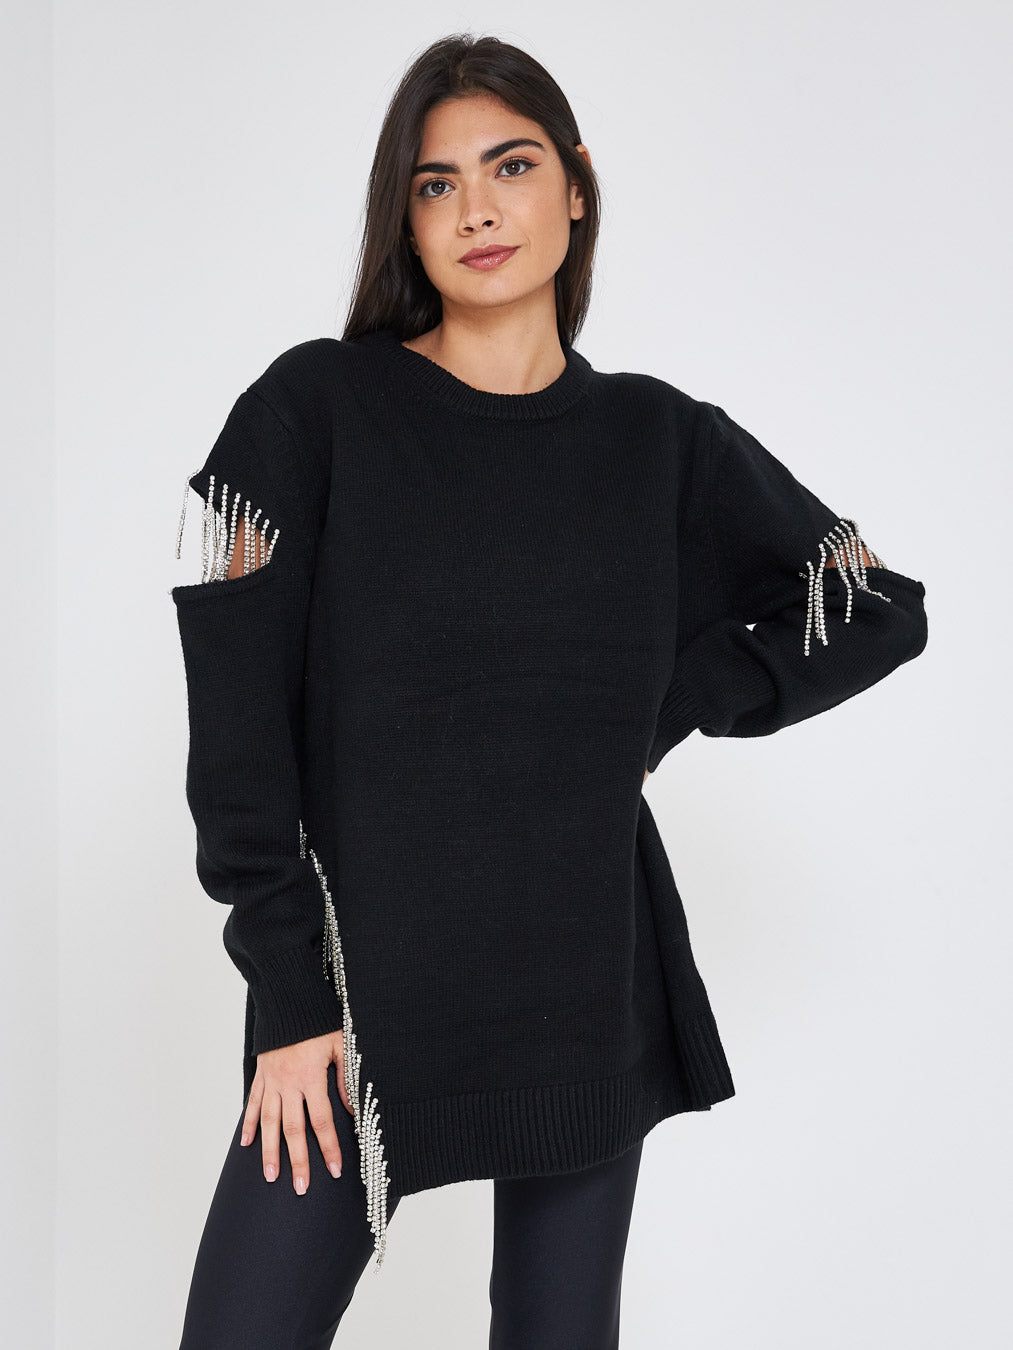 Eleh black cut-out sweater with rhinestones